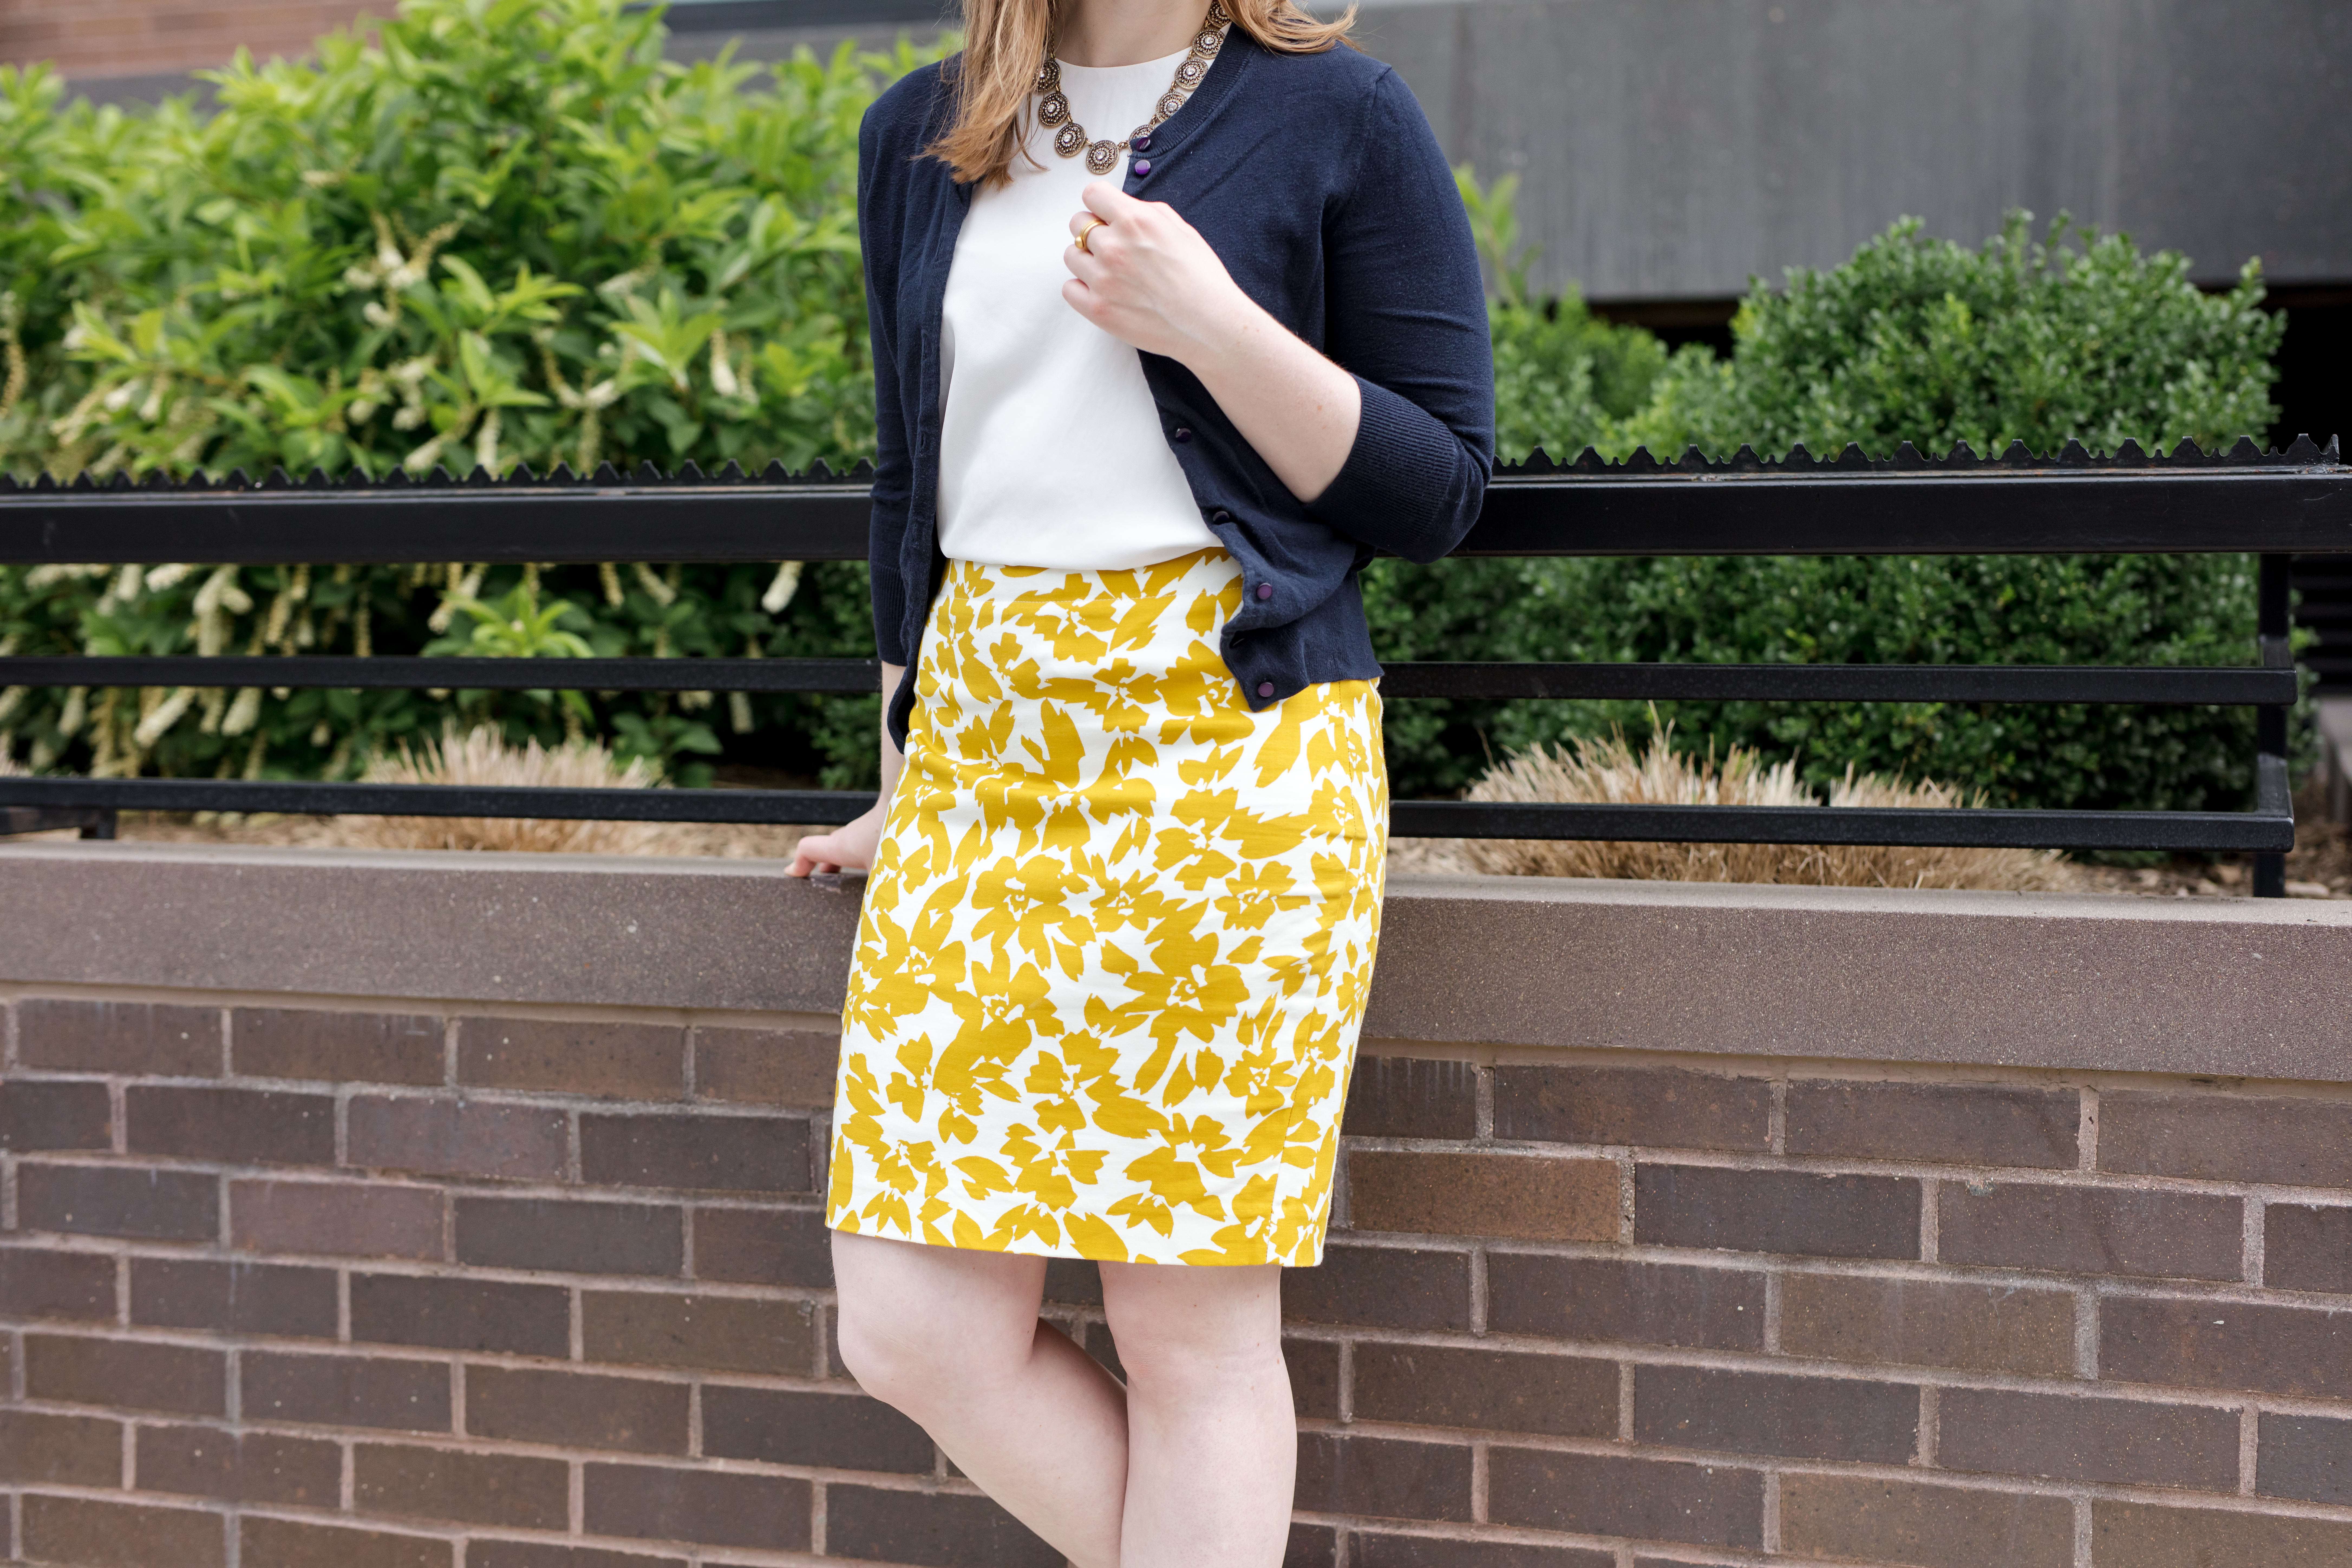 The Floral Pencil Skirt | Something Good, @danaerinw , yellow patterned skirt, floral skirt, yellow patterned